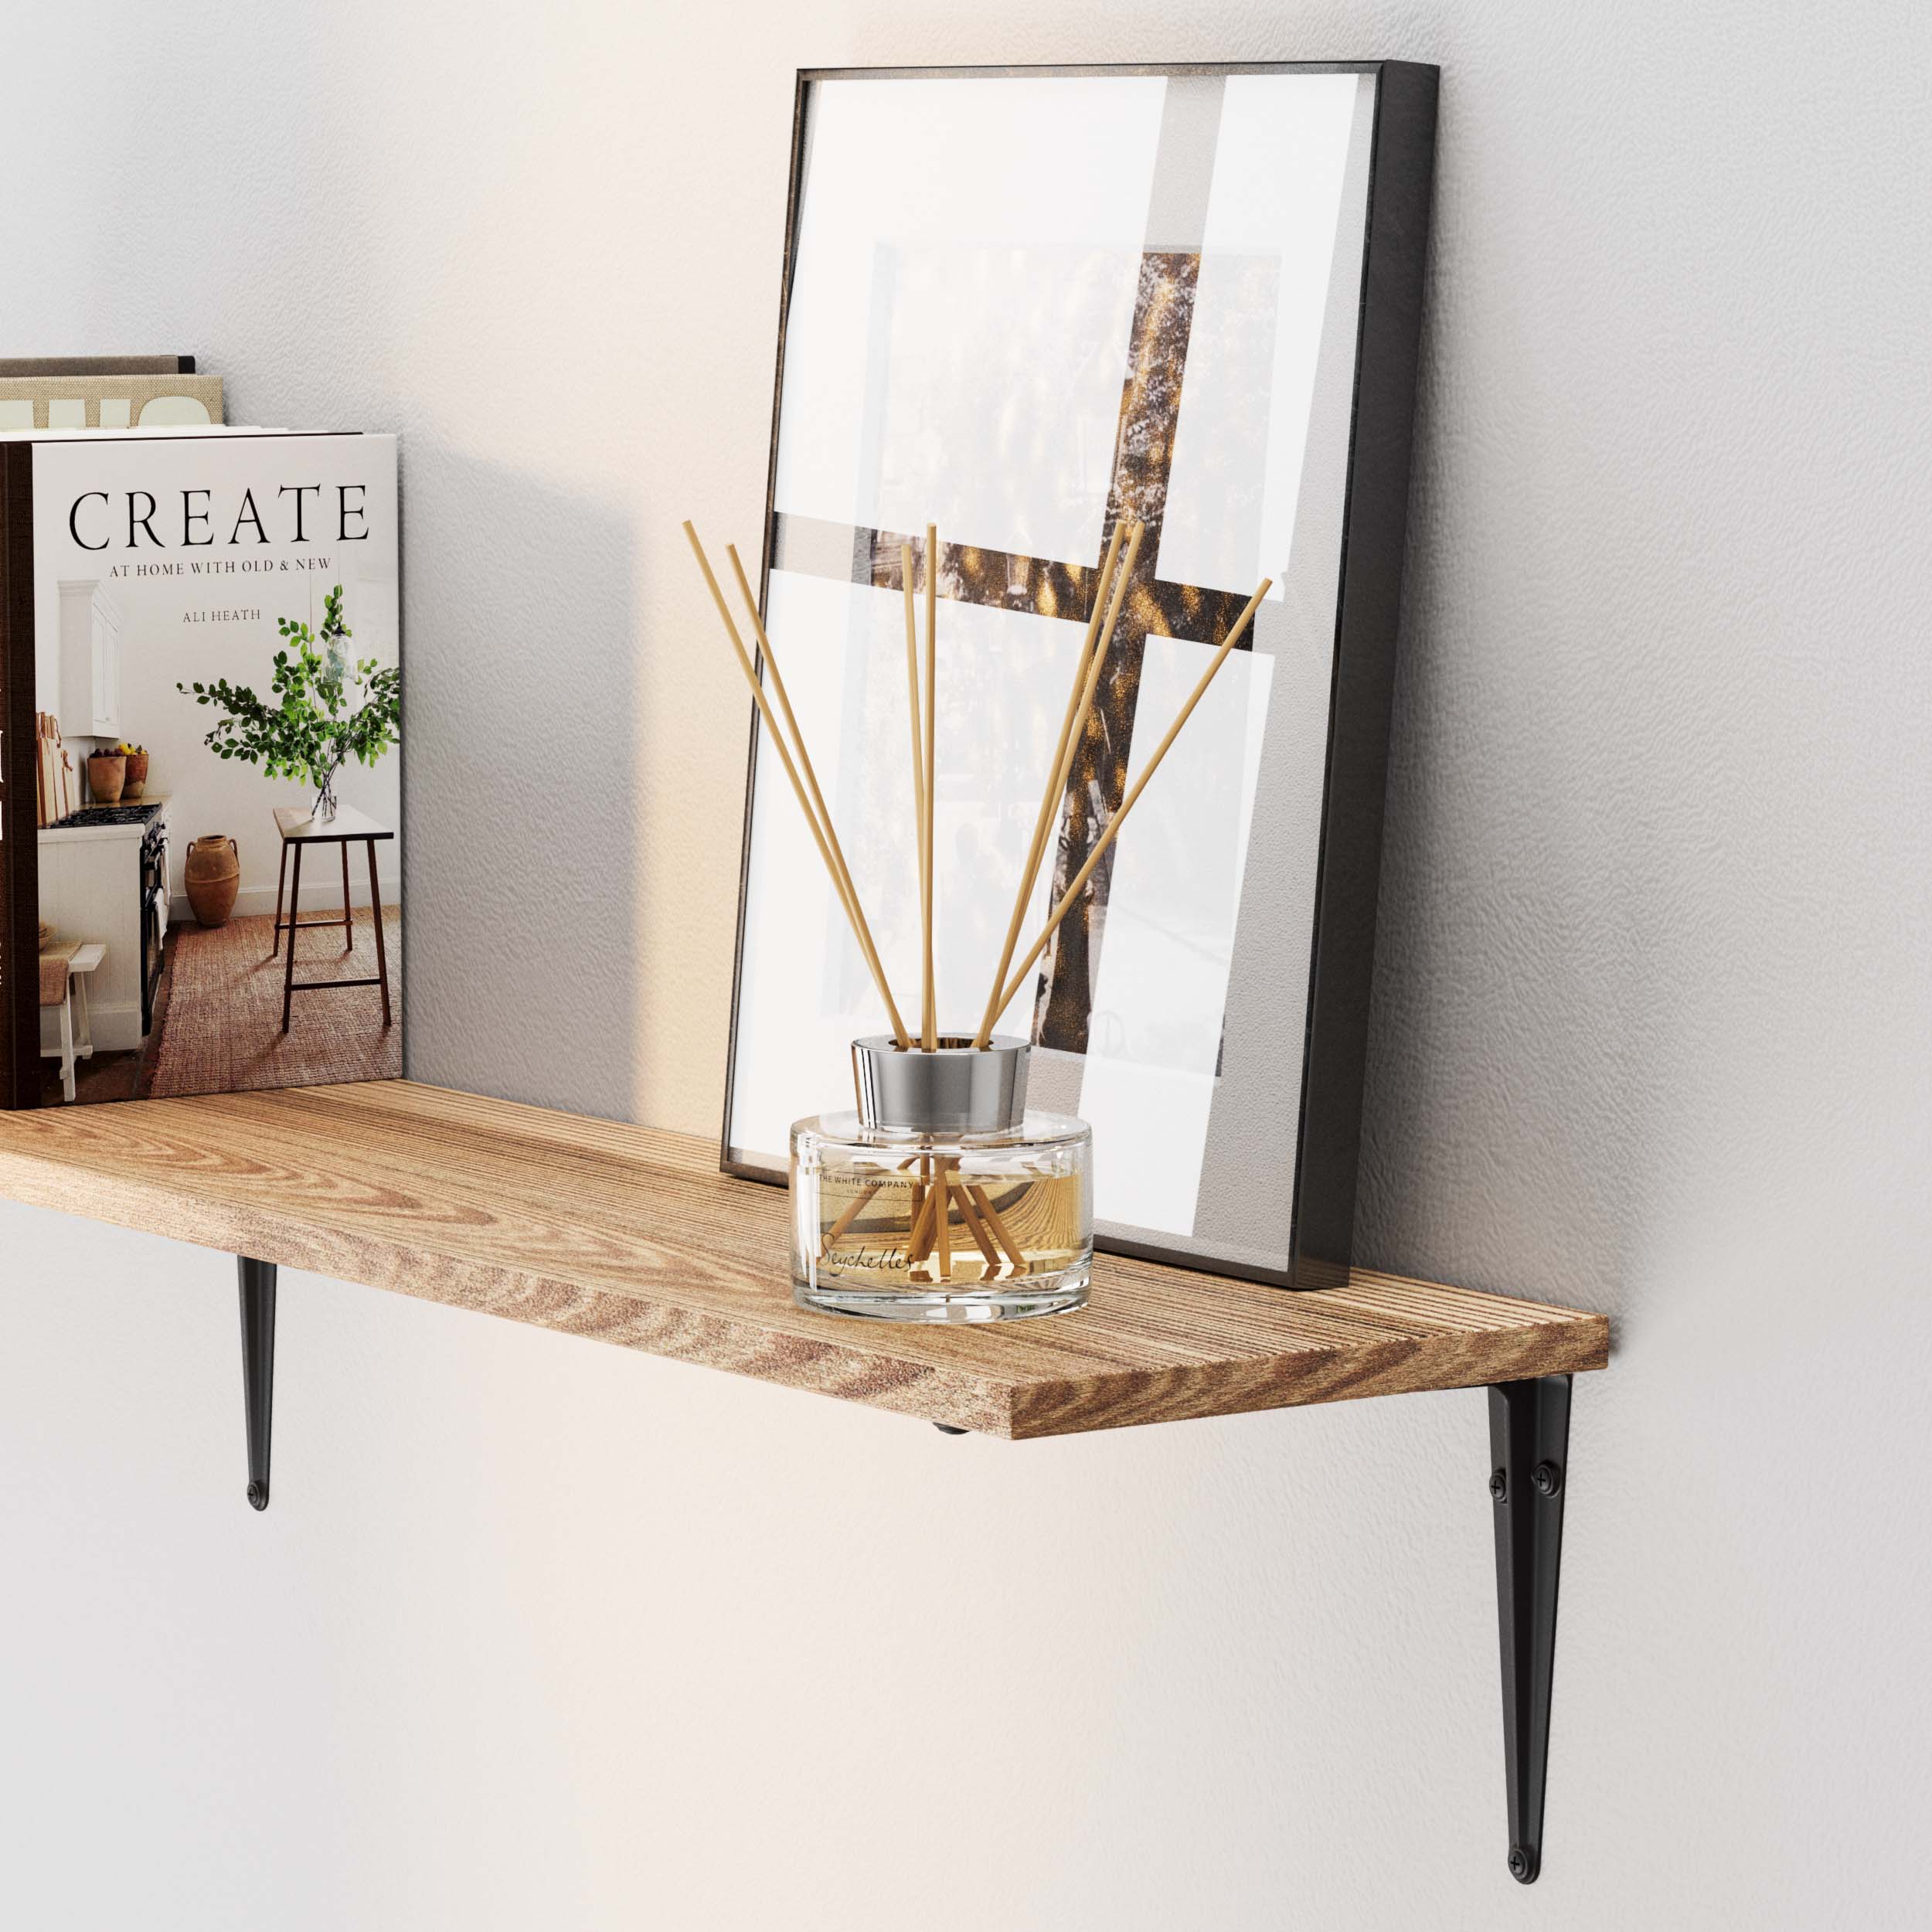 A modern wall storage shelf burnt displays a framed abstract art piece, a decorative reed diffuser, and a stylish magazine on a white wall.